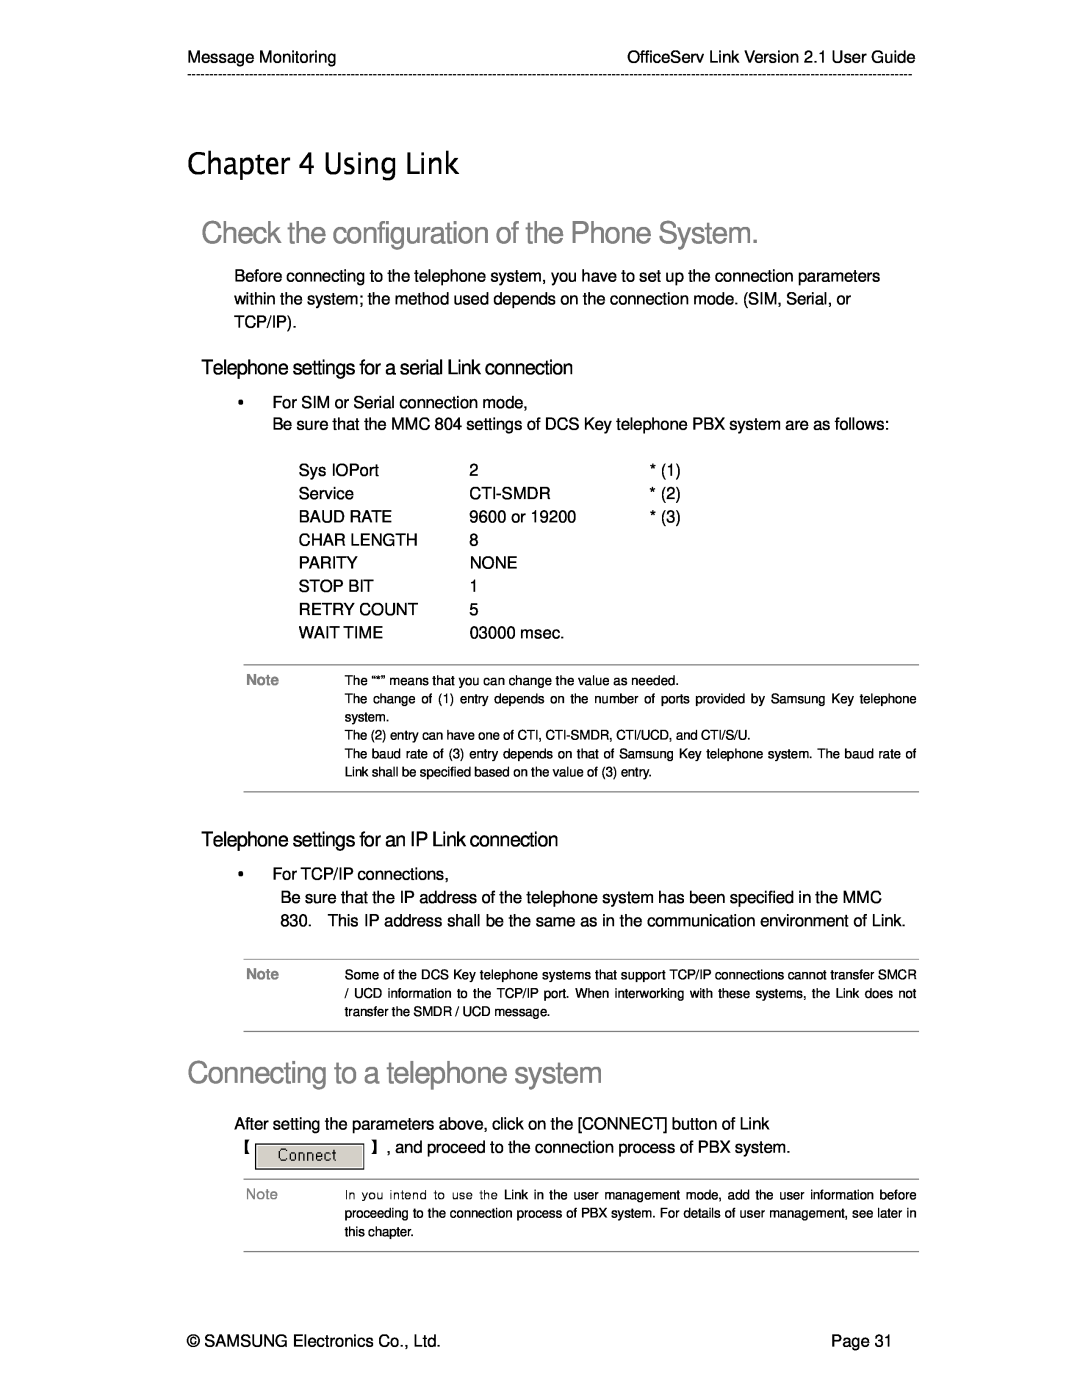 Samsung Version 2.1 manual Using Link, Check the configuration of the Phone System, Connecting to a telephone system 